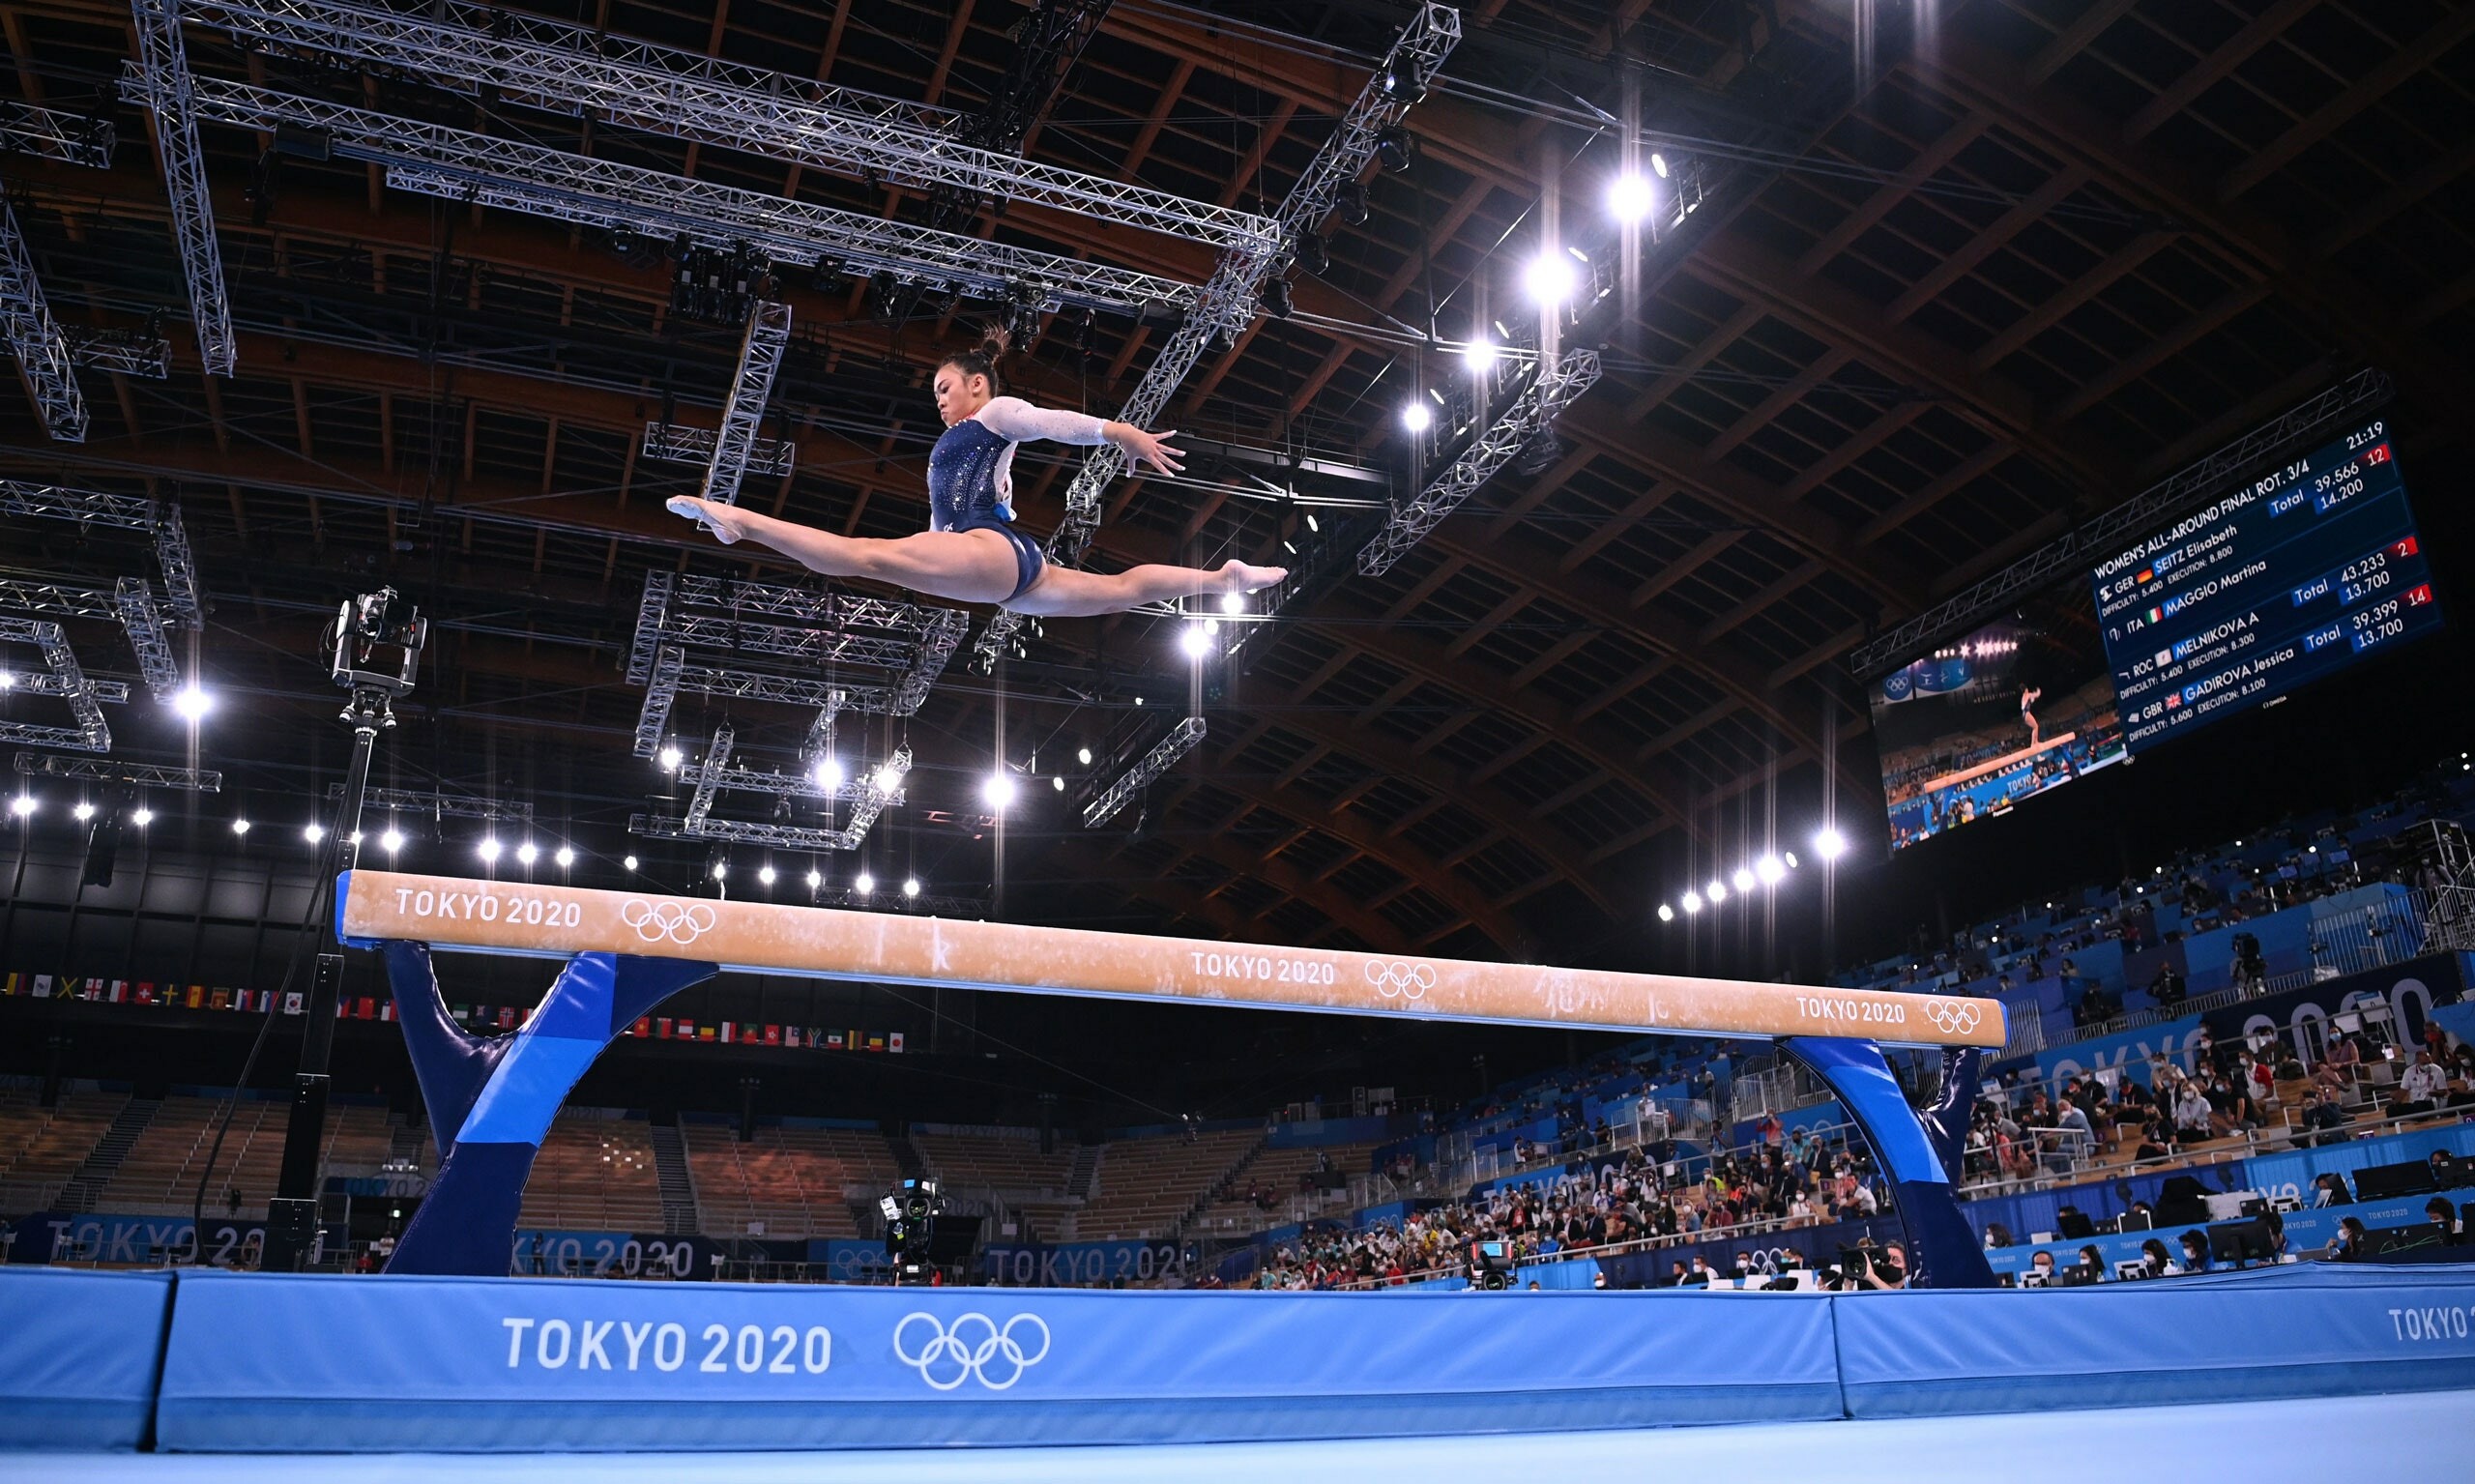 Sunisa Lee: Tokyo 2020, She won the silver medal on uneven bars at the Gymnix International Junior Cup in 2017. 2560x1540 HD Wallpaper.